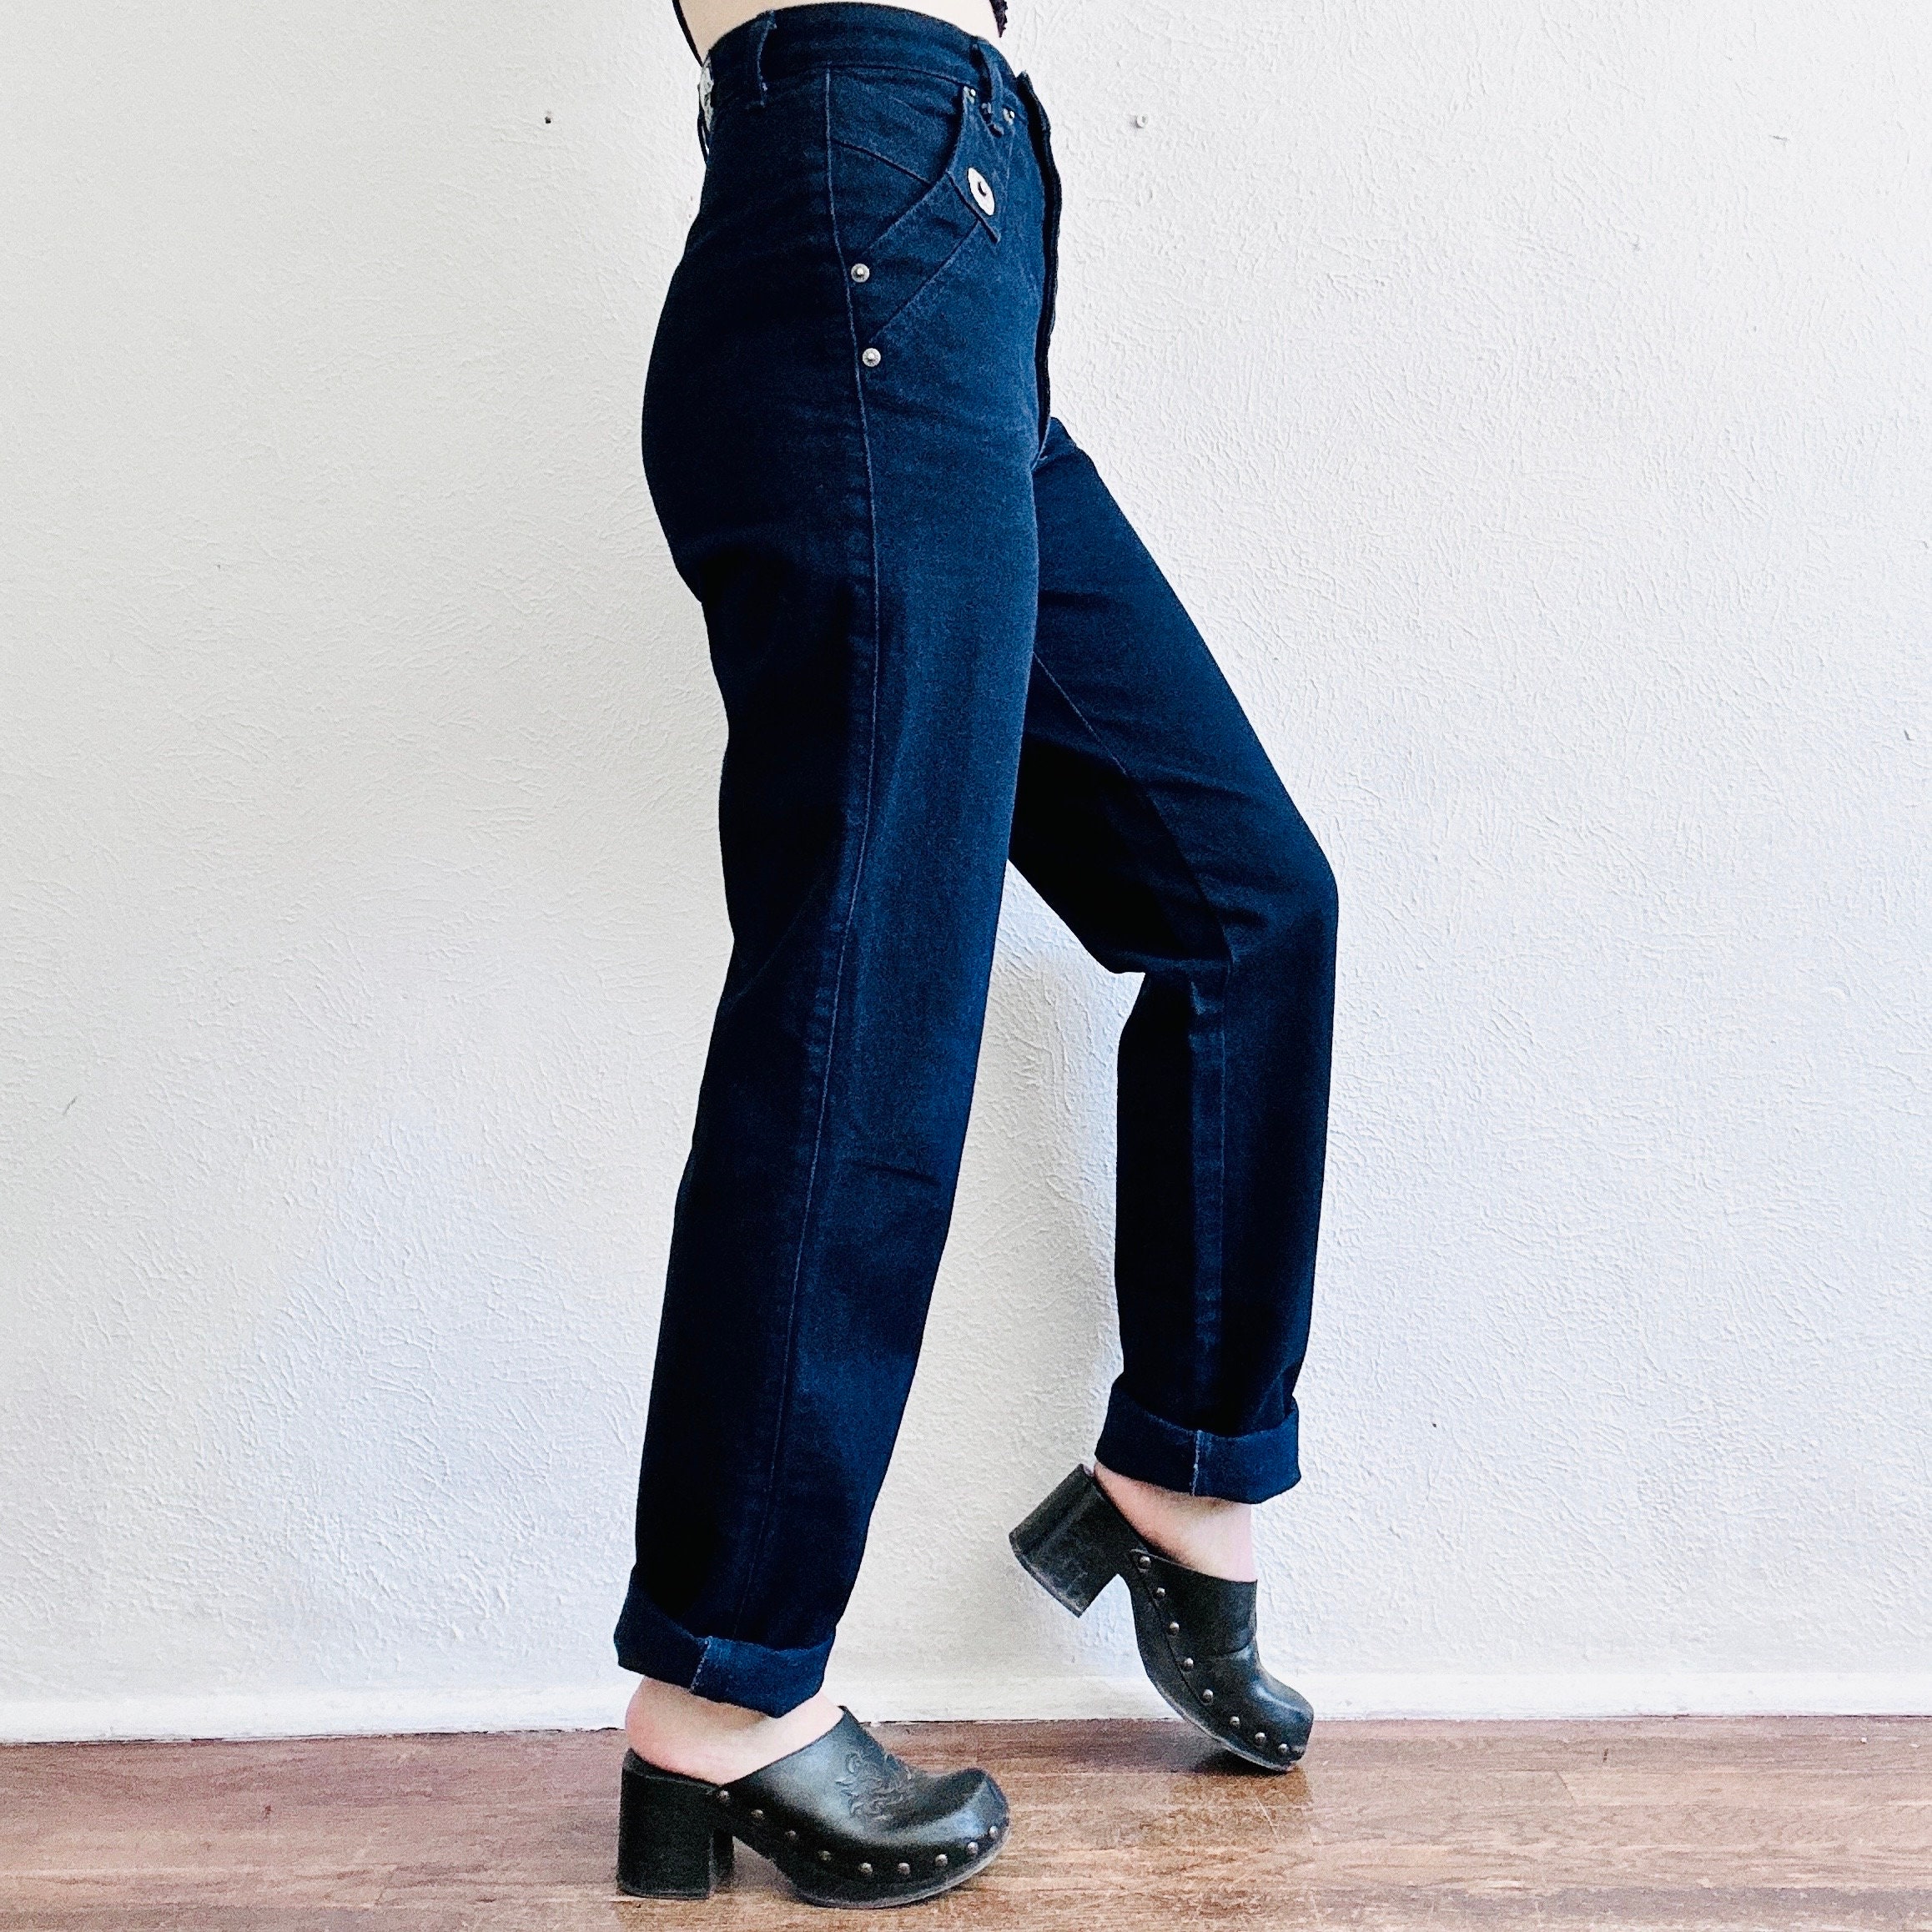 80s ROUGHRIDER Bareback Jeans, 27 Waist, 90s Vintage Rockies Concho ...